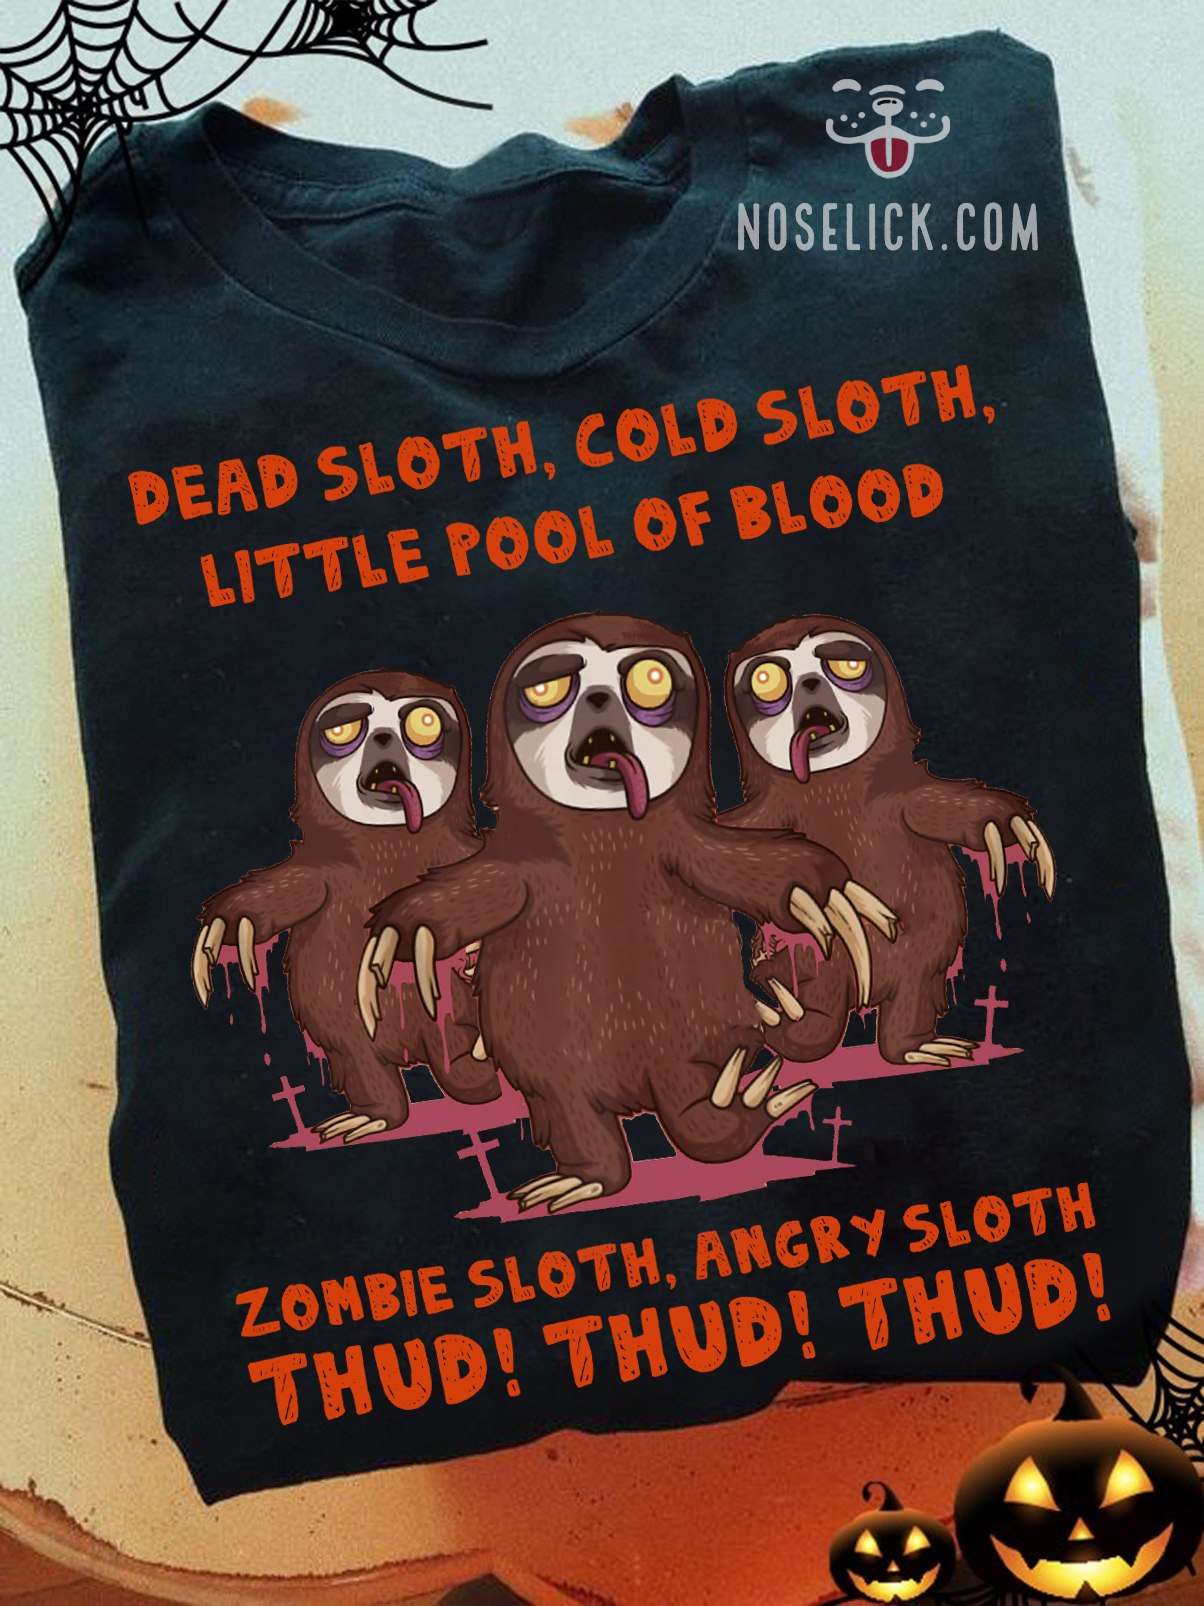 Dead sloth, cold sloth, little pool of blood - Zombies sloth, scary zombie shirt for Halloween